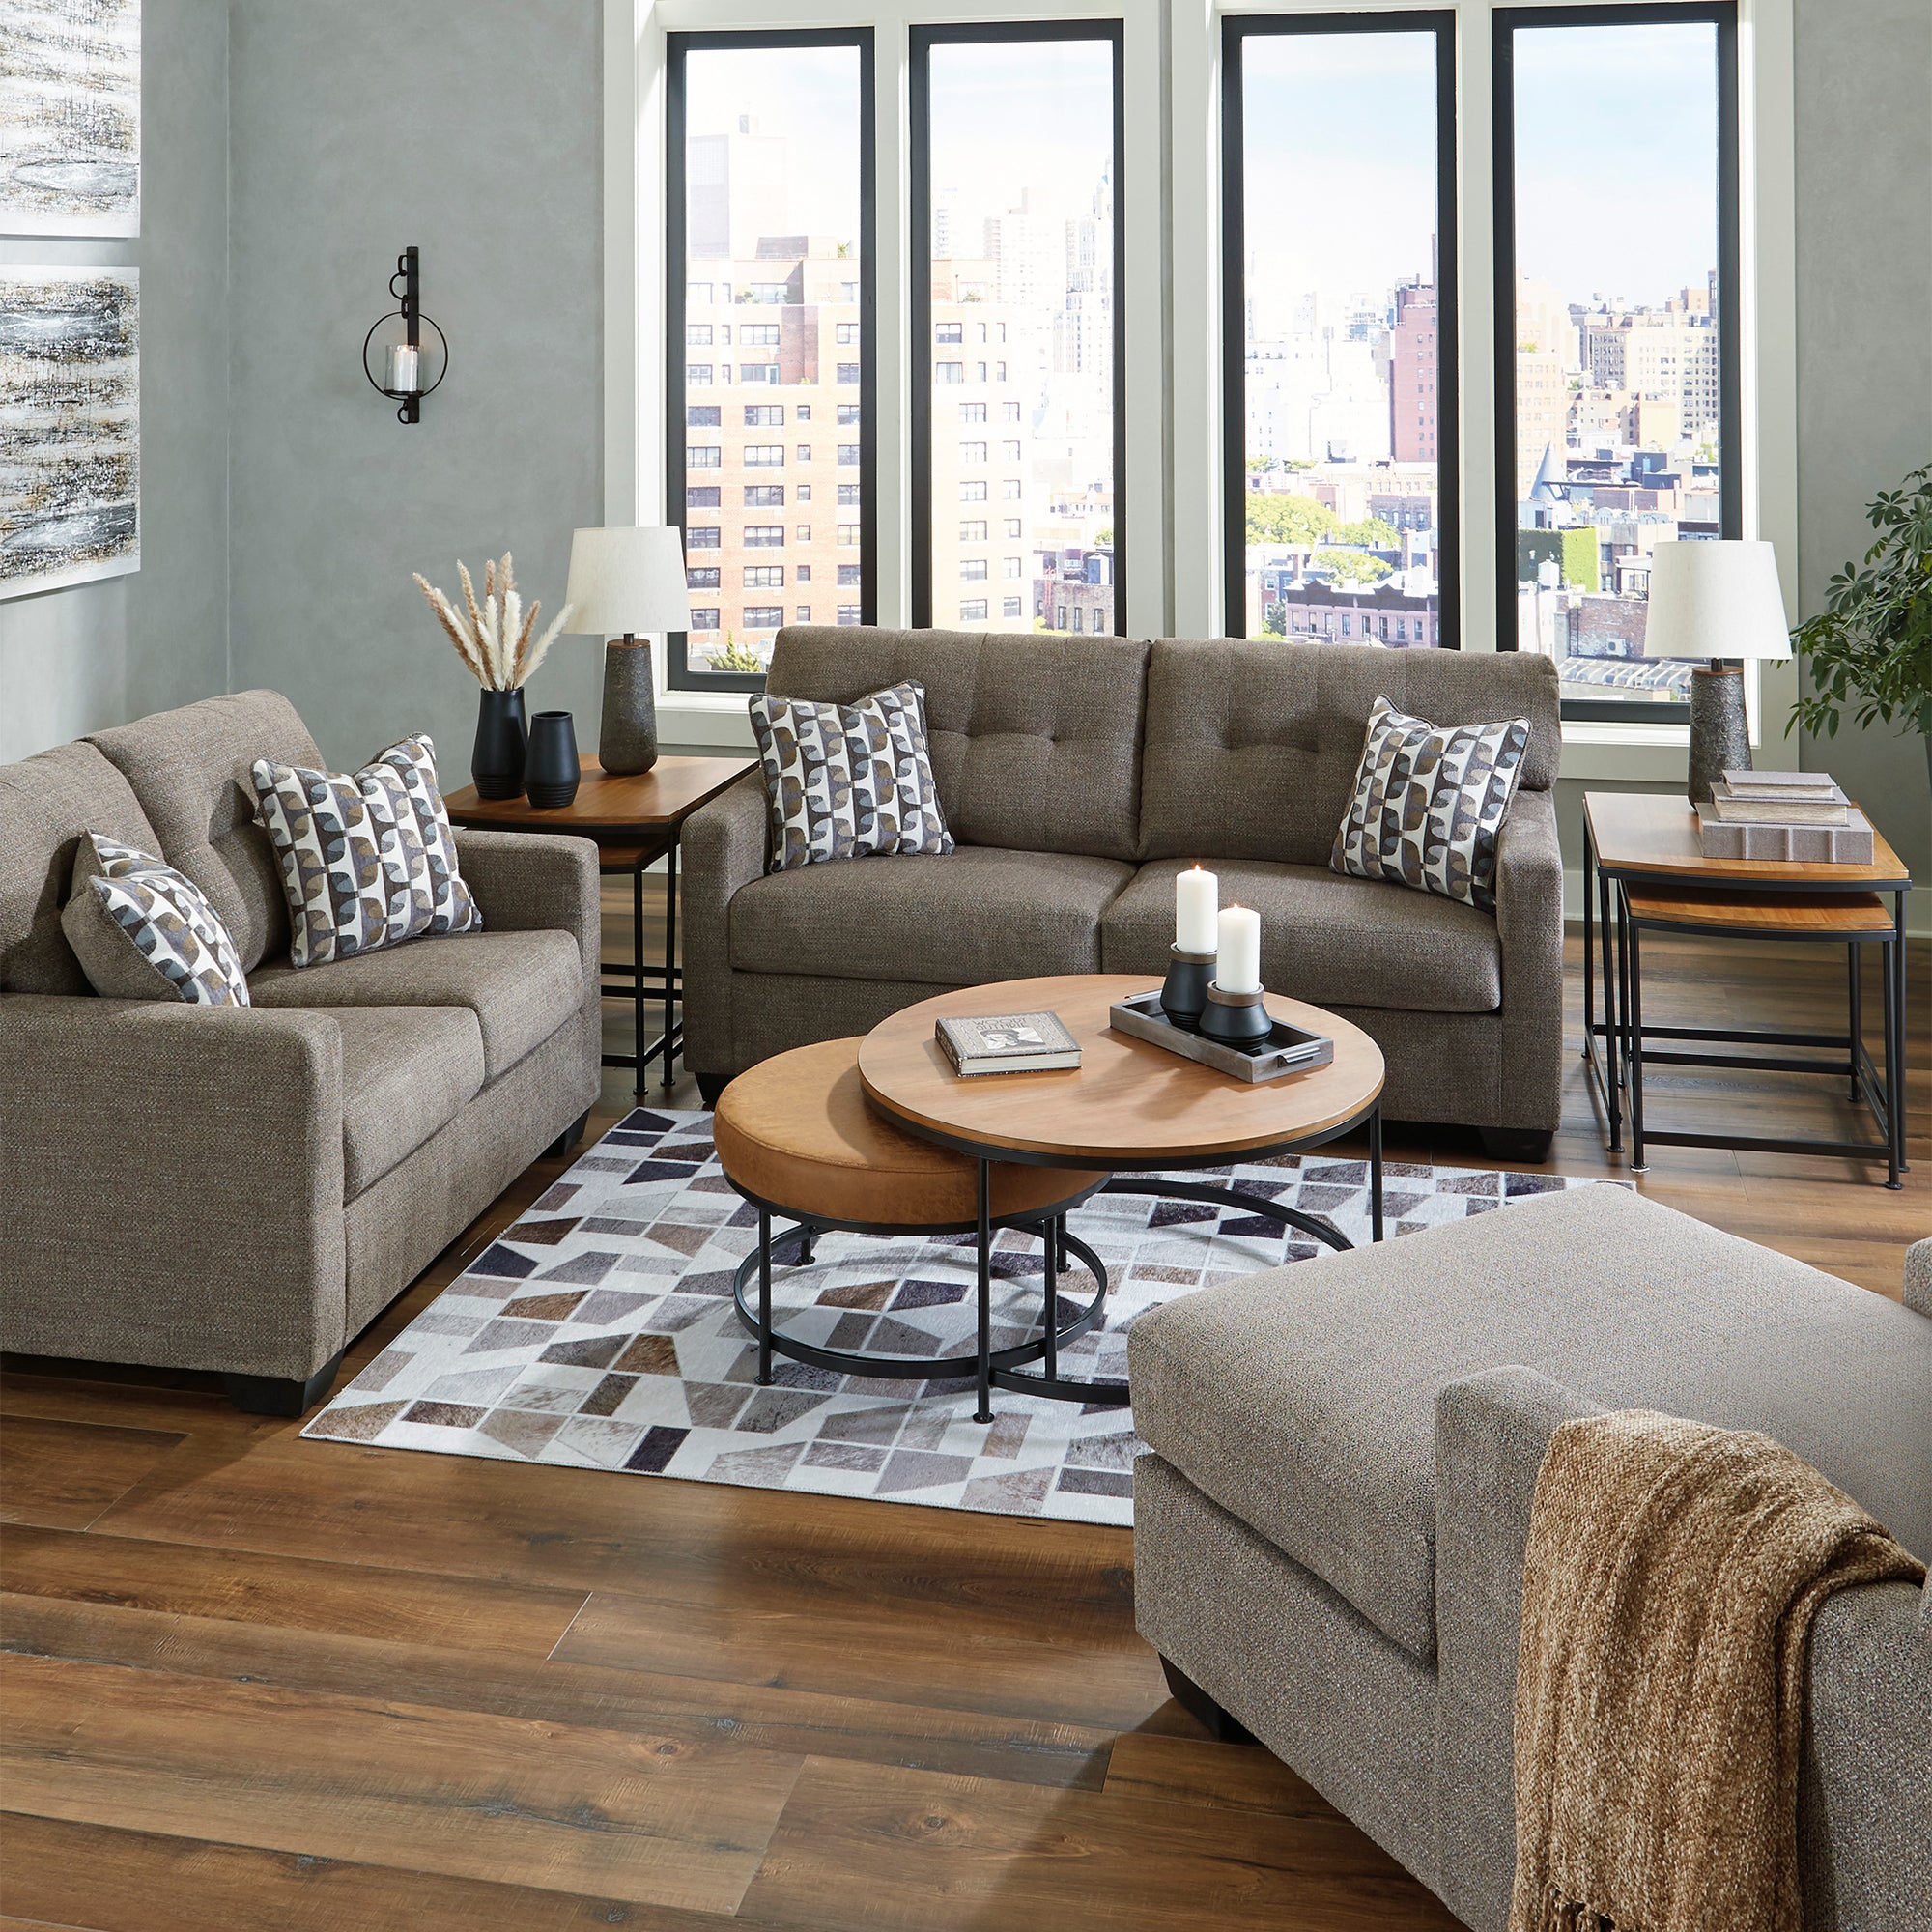 Contemporary Mahoney Sofa and Loveseat in deep chocolate, a statement of style and comfort for any home